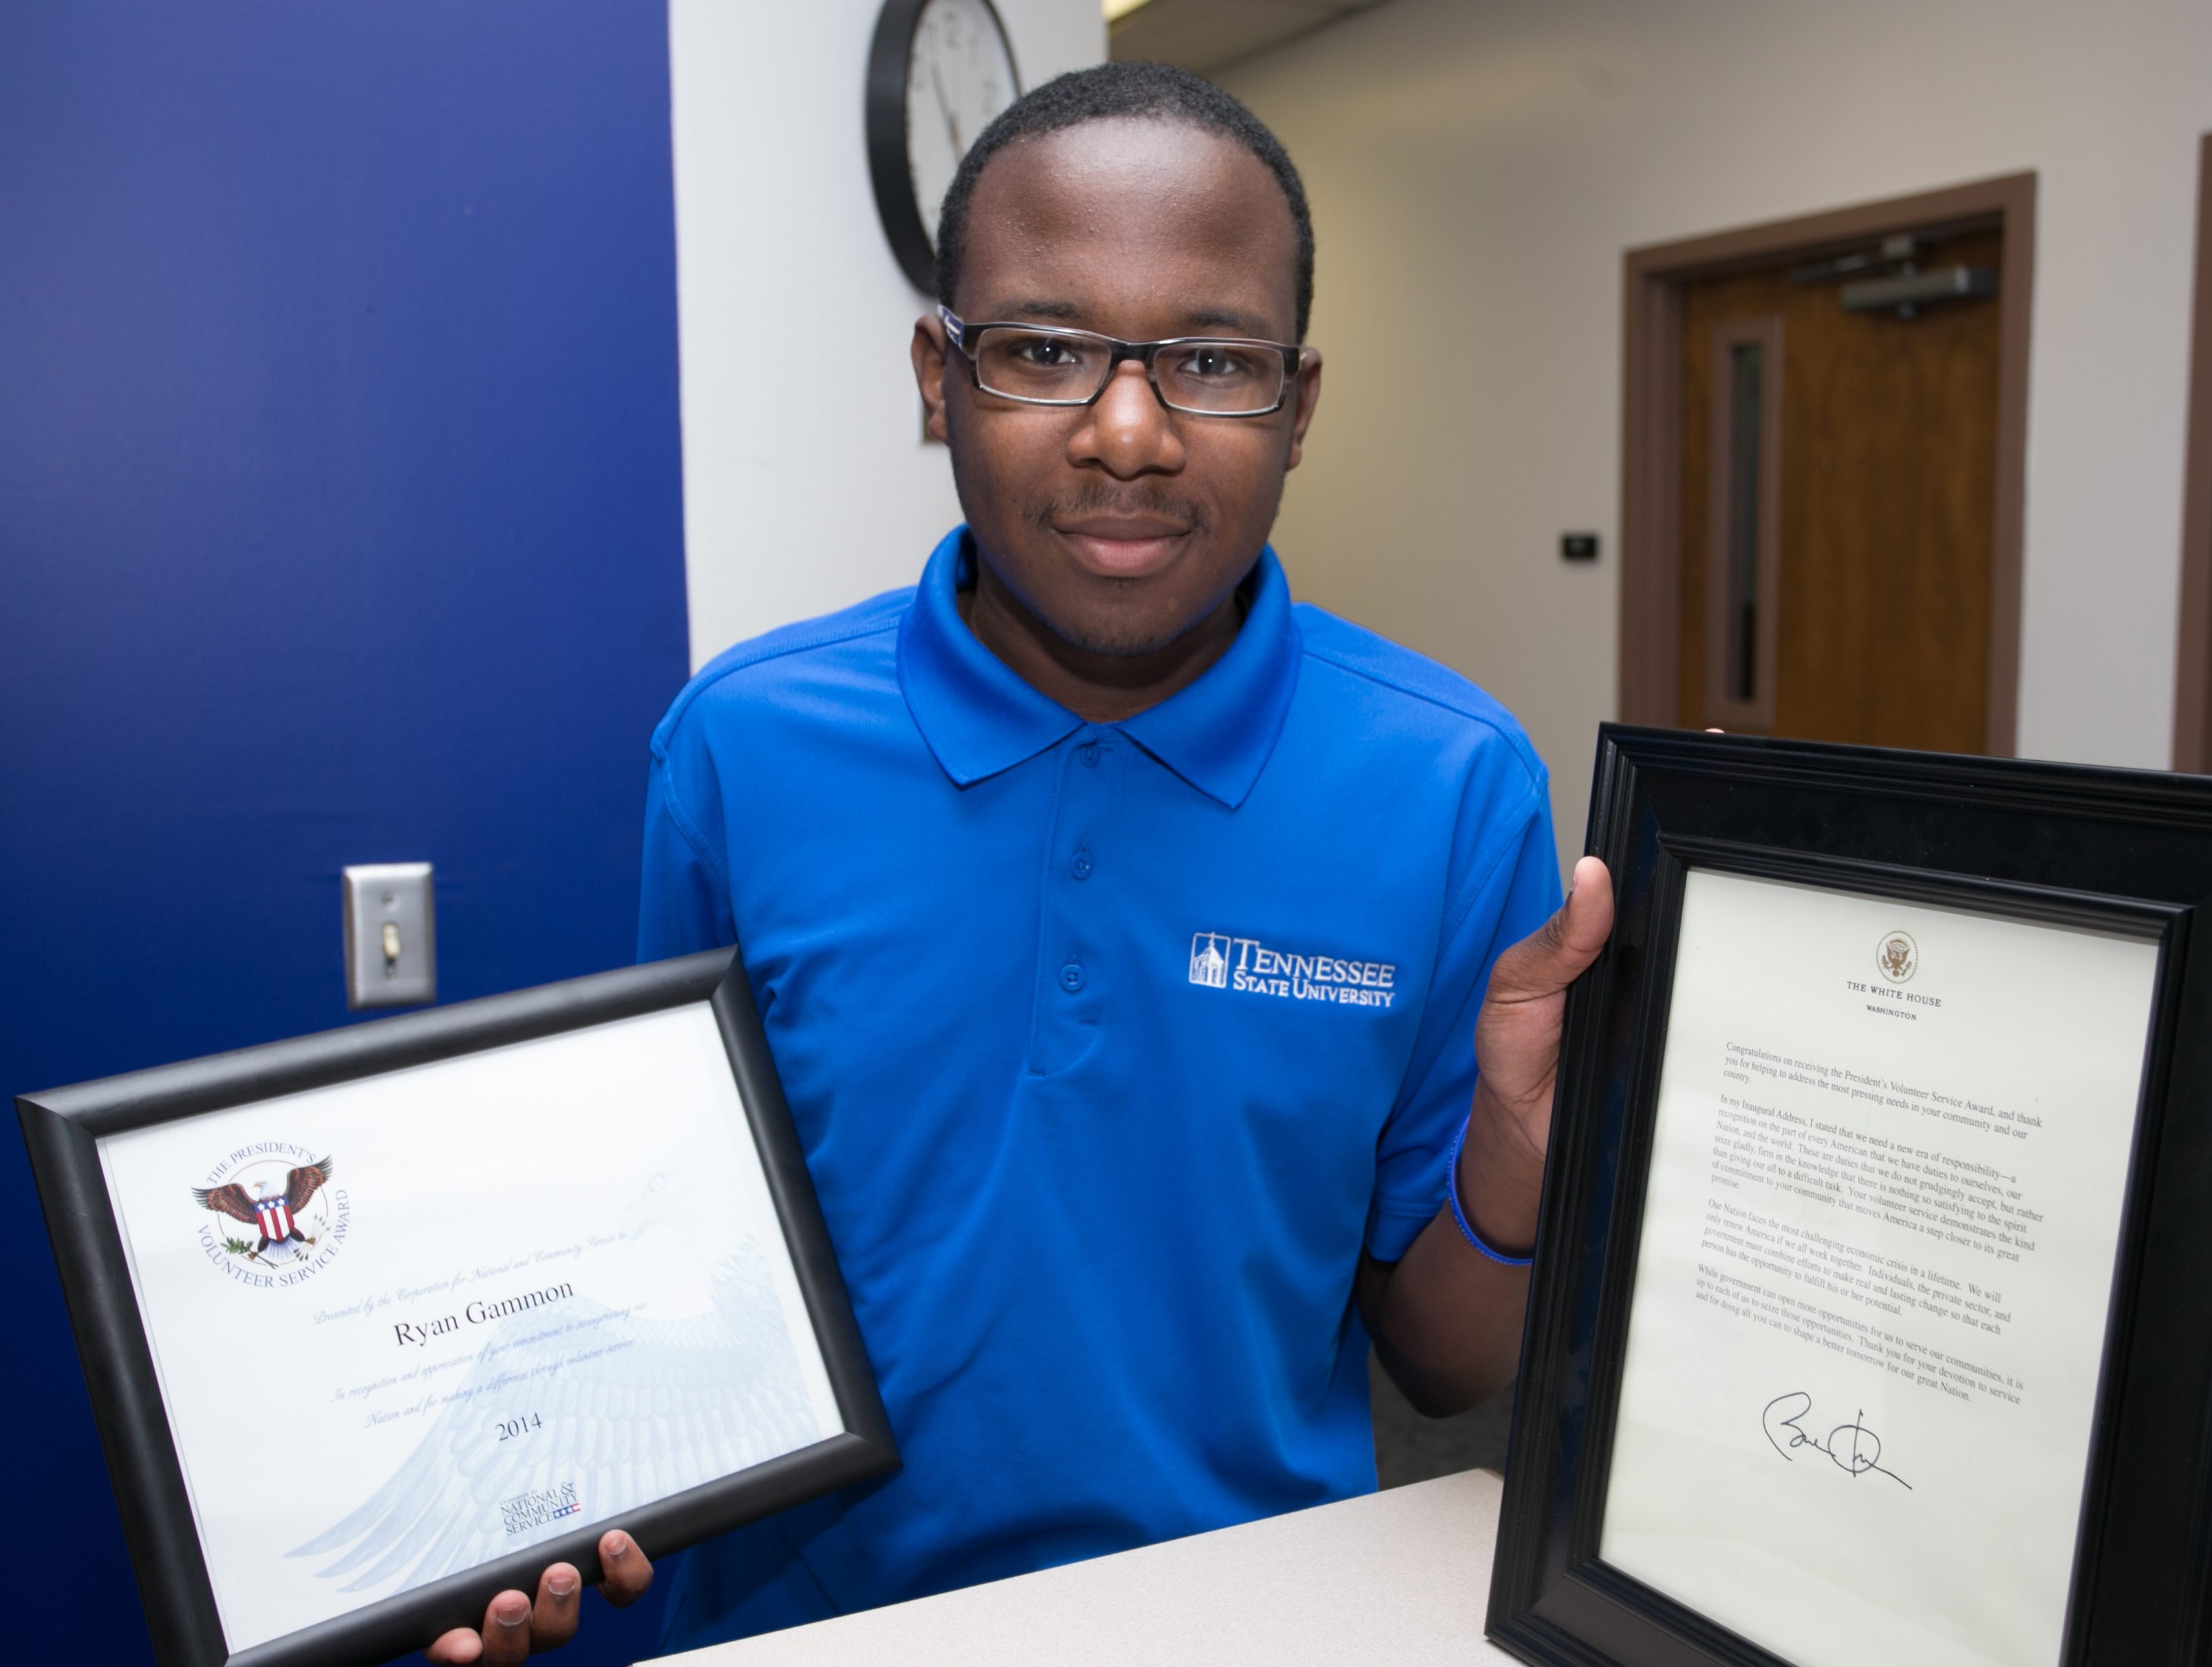 Ryan Gammon, a junior majoring in Criminal Justice, displays his letter from Barack Obama congratulating him on his President’s Volunteer Service Award along with an award citation. (photo by John Cross. TSU Media Relations)